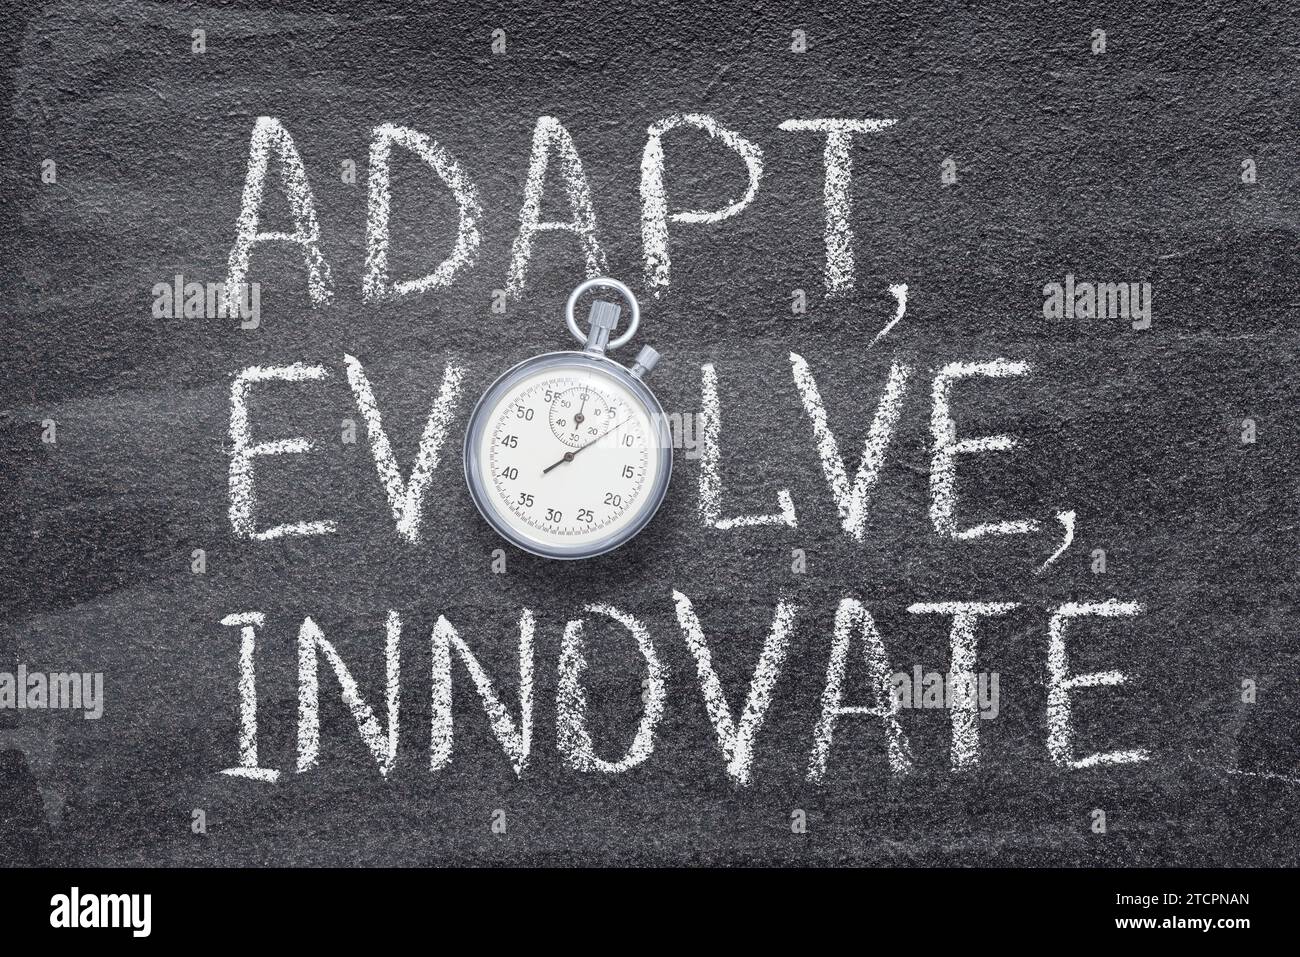 adapt, evolve, innovate phrase written on chalkboard with vintage precise stopwatch Stock Photo